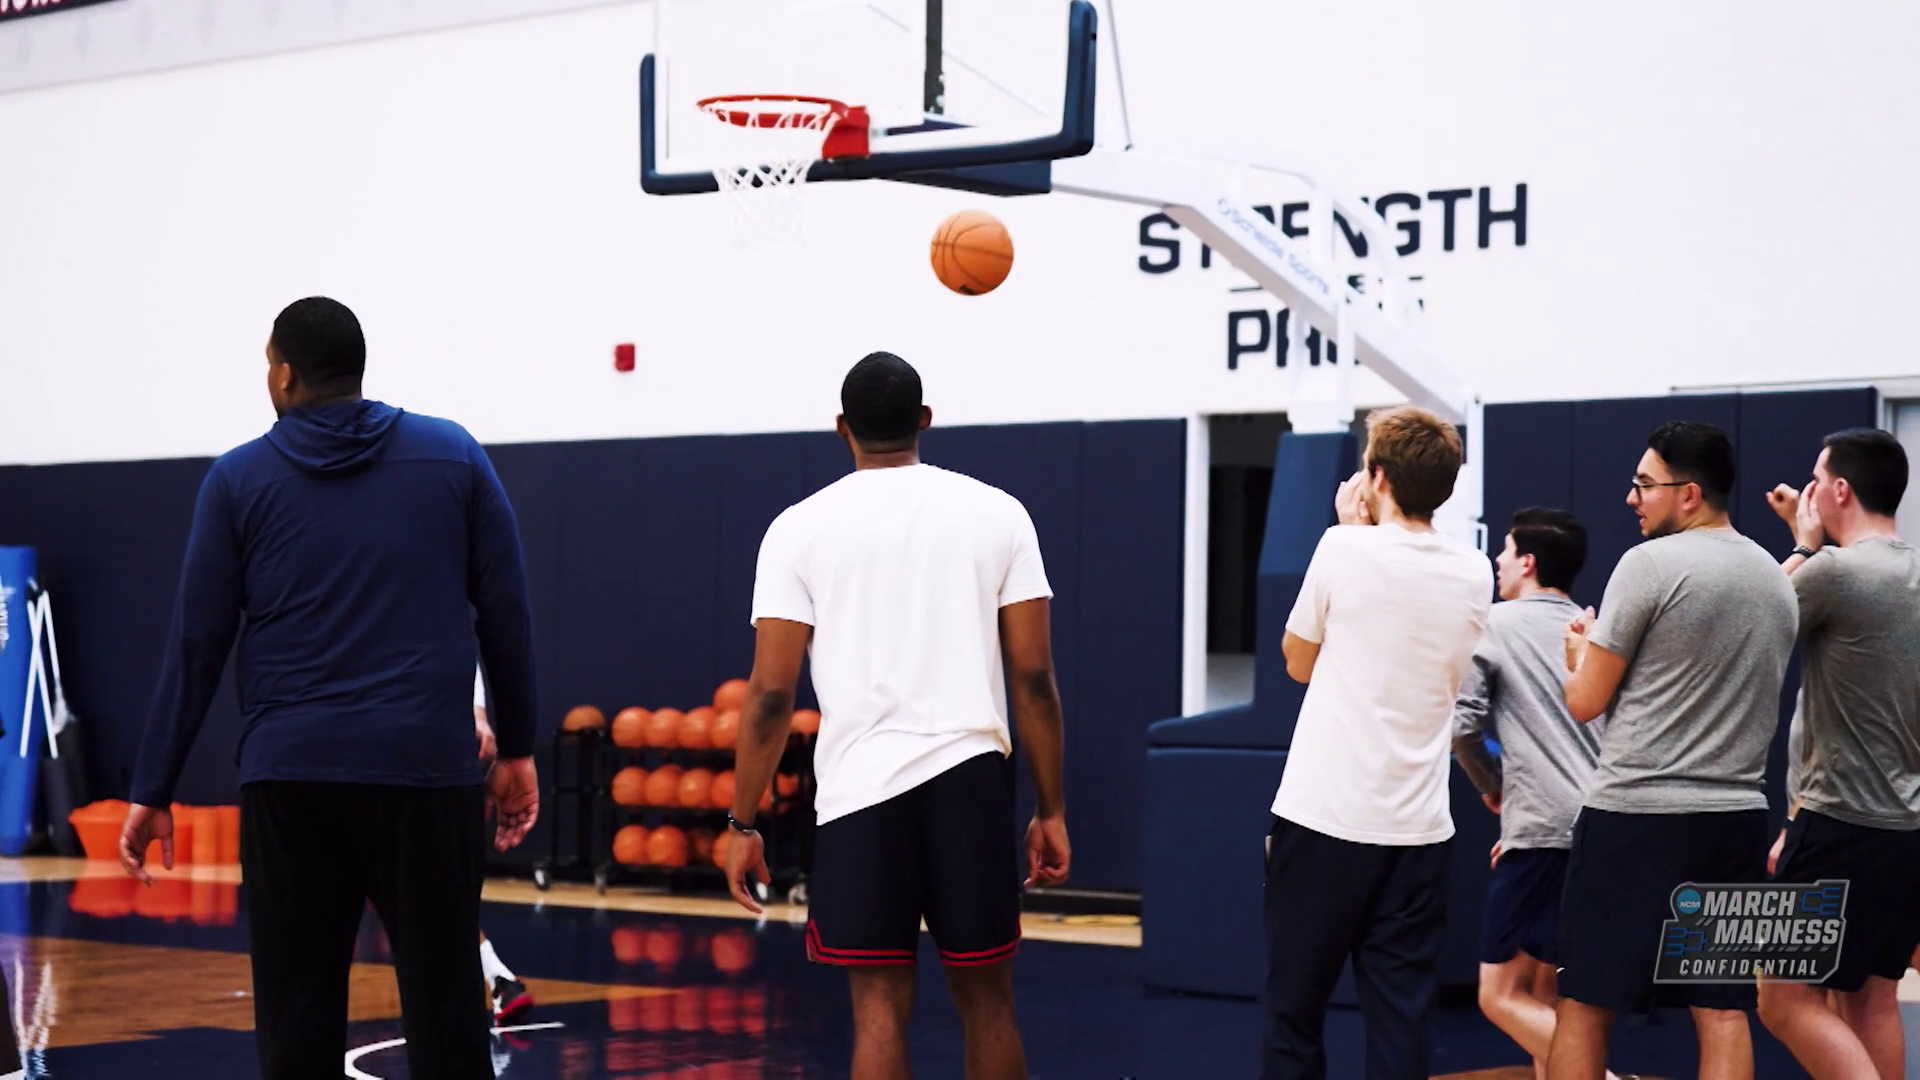 UConn Confidential: Team managers make practice fun for the players